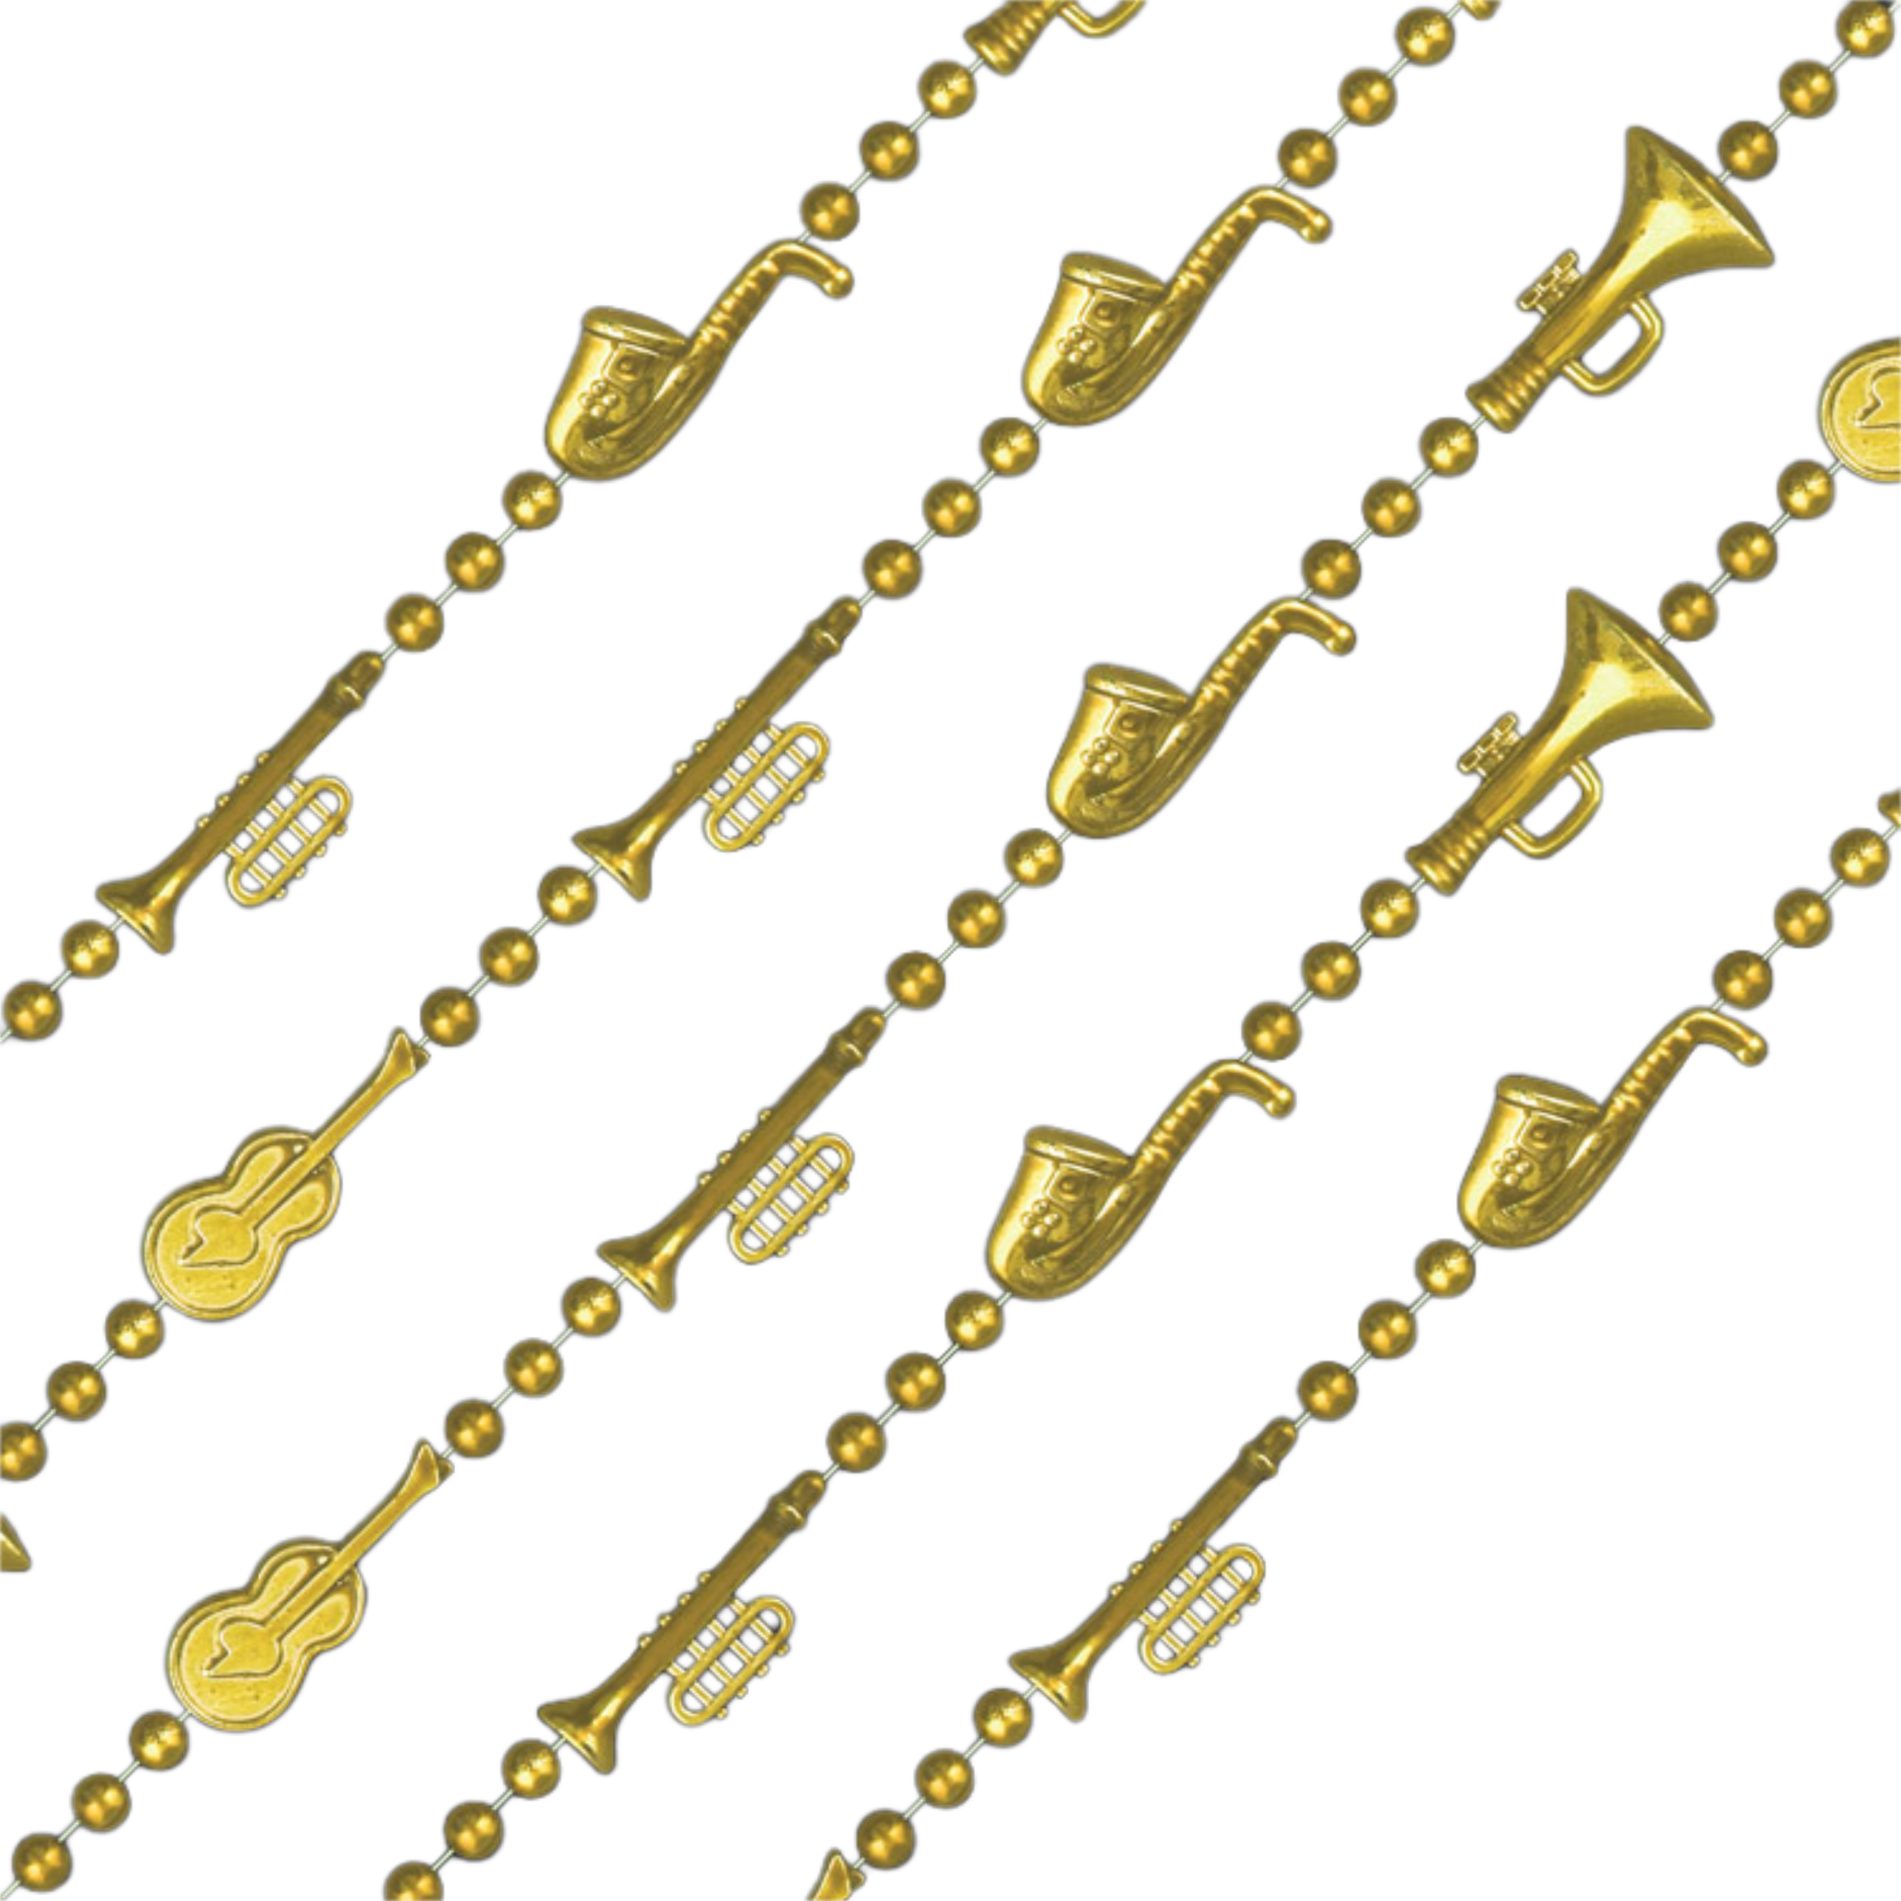 Non Light Up Metallic Gold Plated Jazz Instruments Beaded Necklace Pack of 12 All Products 3